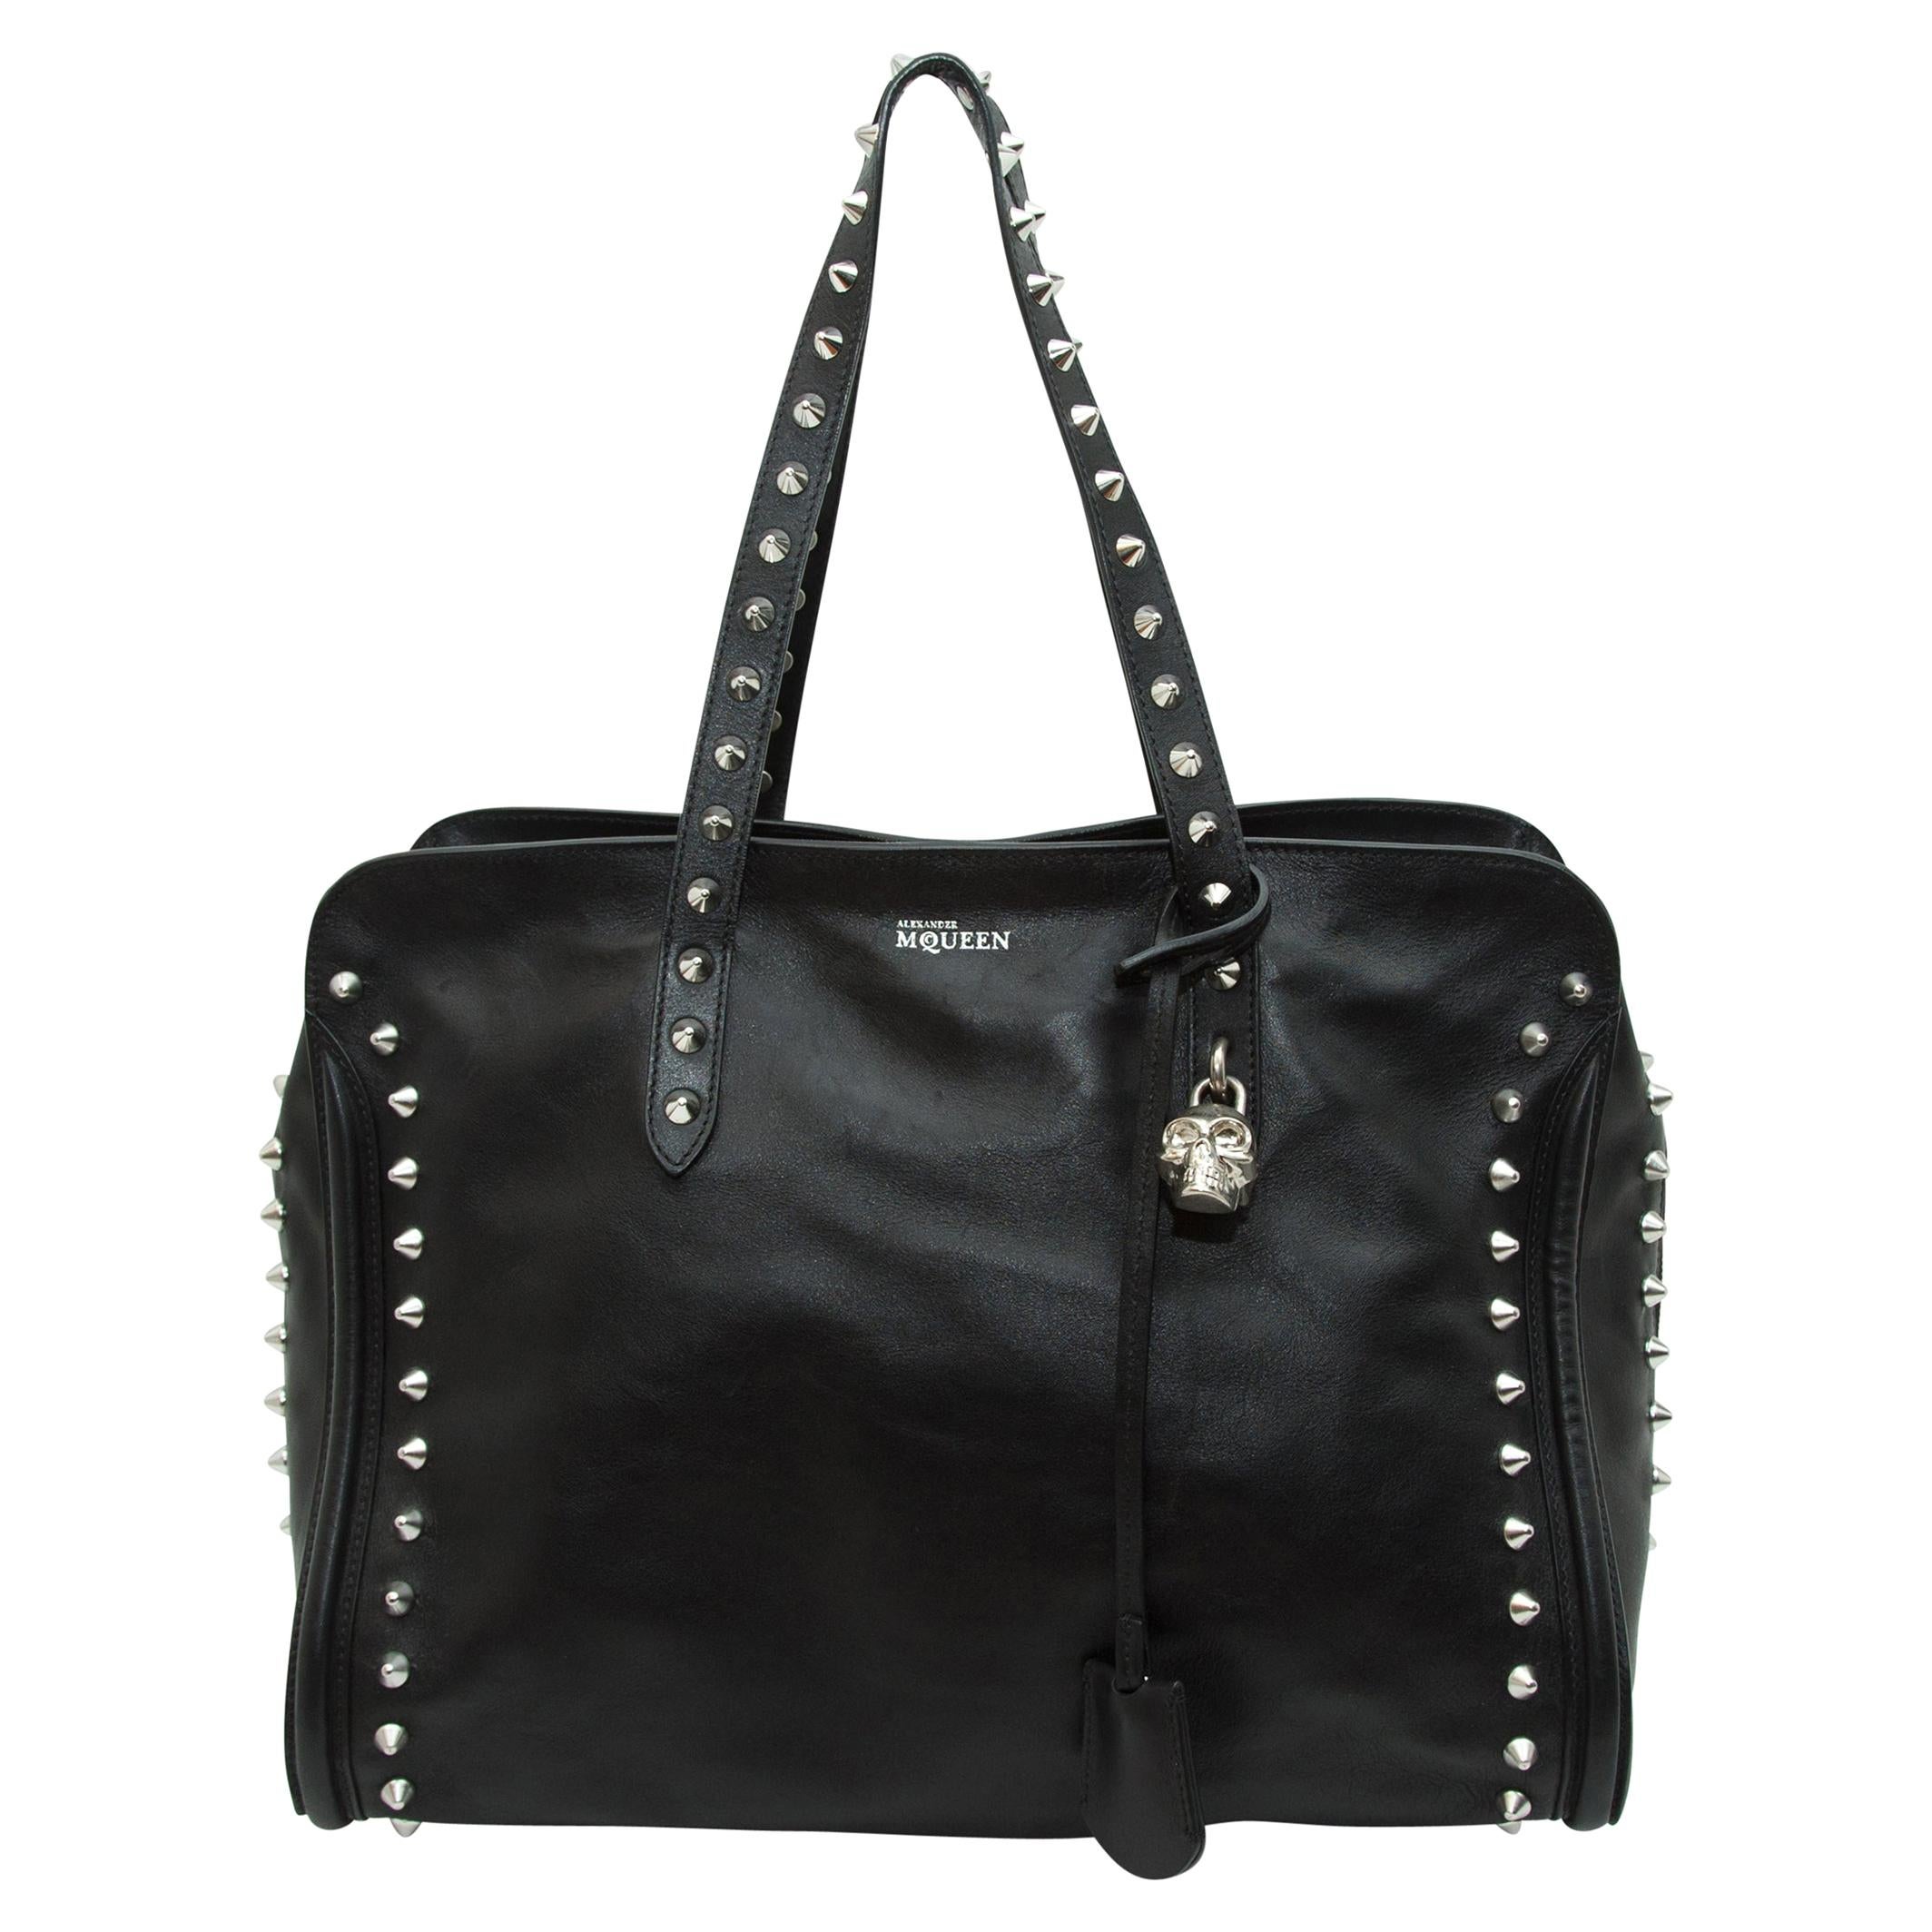 Alexander McQueen Black Studded Leather Tote Bag